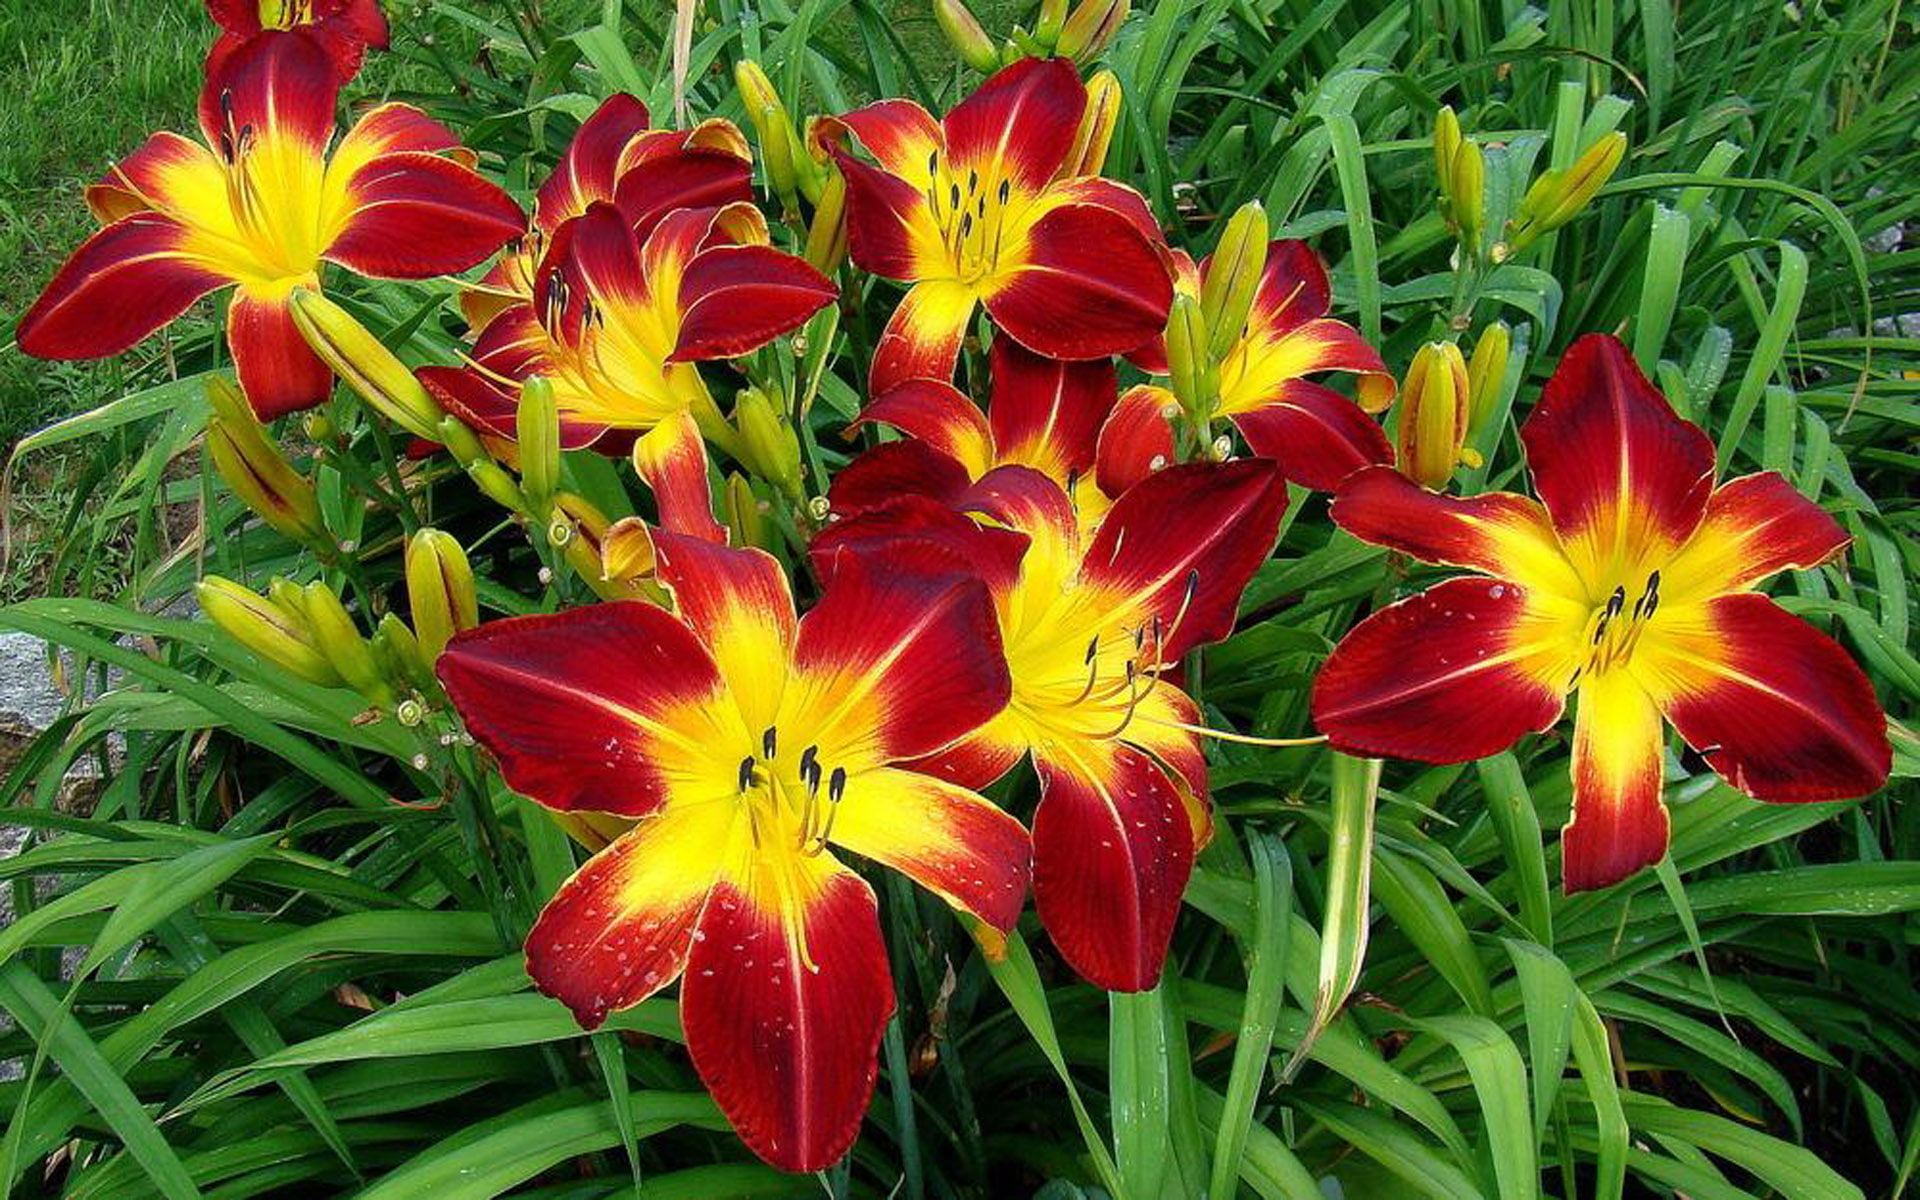 Daylily Hemerocallis’ Ruby Spider’ Fine Variety Perennial Plants Color Of Flowers Deep Wine Red Desktop Hd Wallpaper For Mobile Phones Tablet And Pc 1920×1200